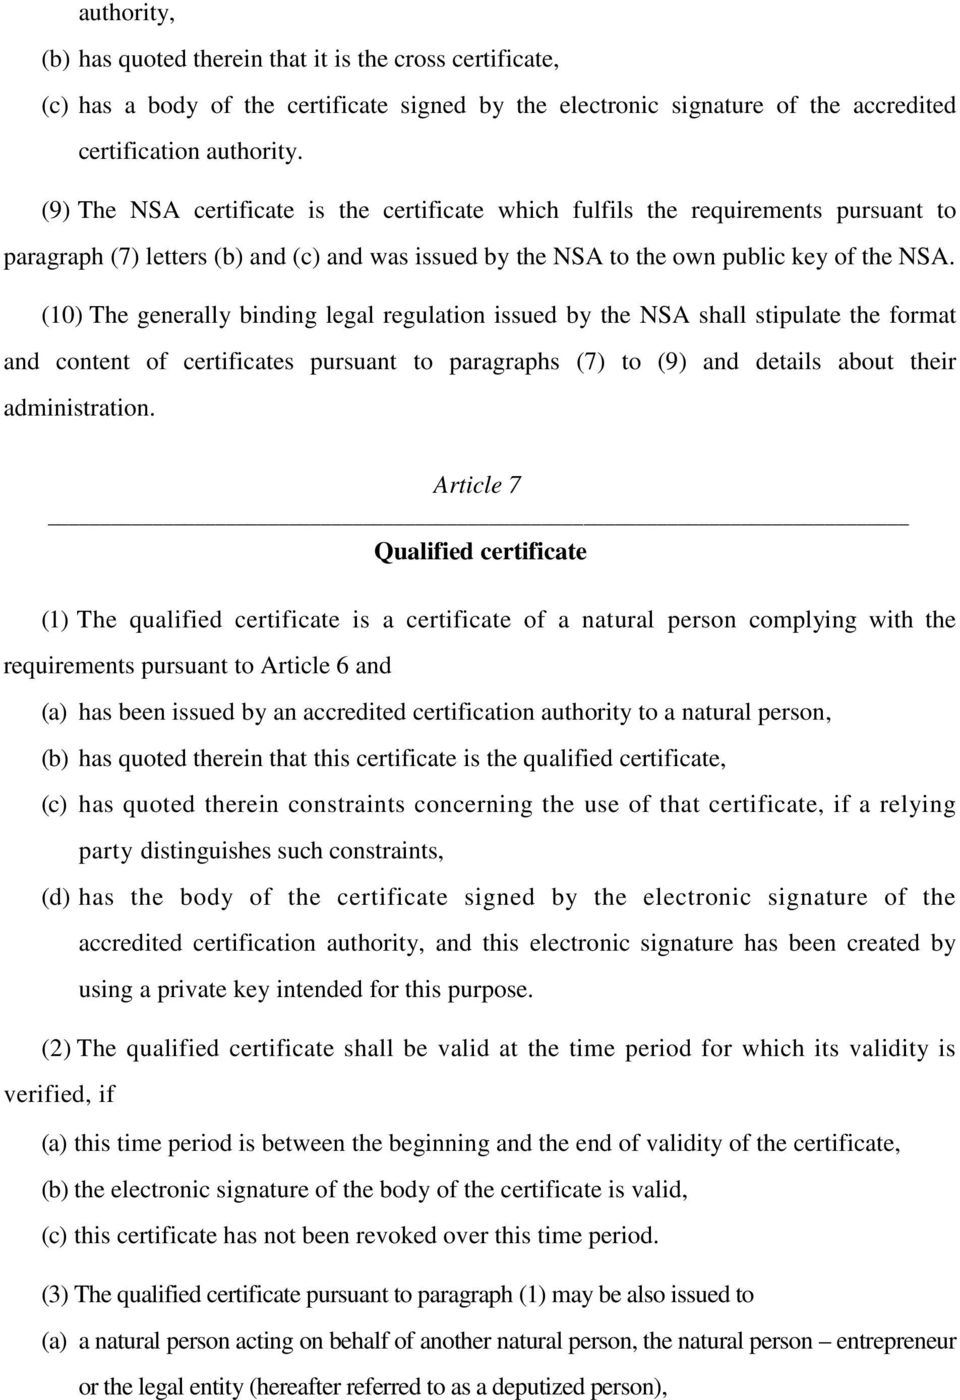 (10) The generally binding legal regulation issued by the NSA shall stipulate the format and content of certificates pursuant to paragraphs (7) to (9) and details about their administration.